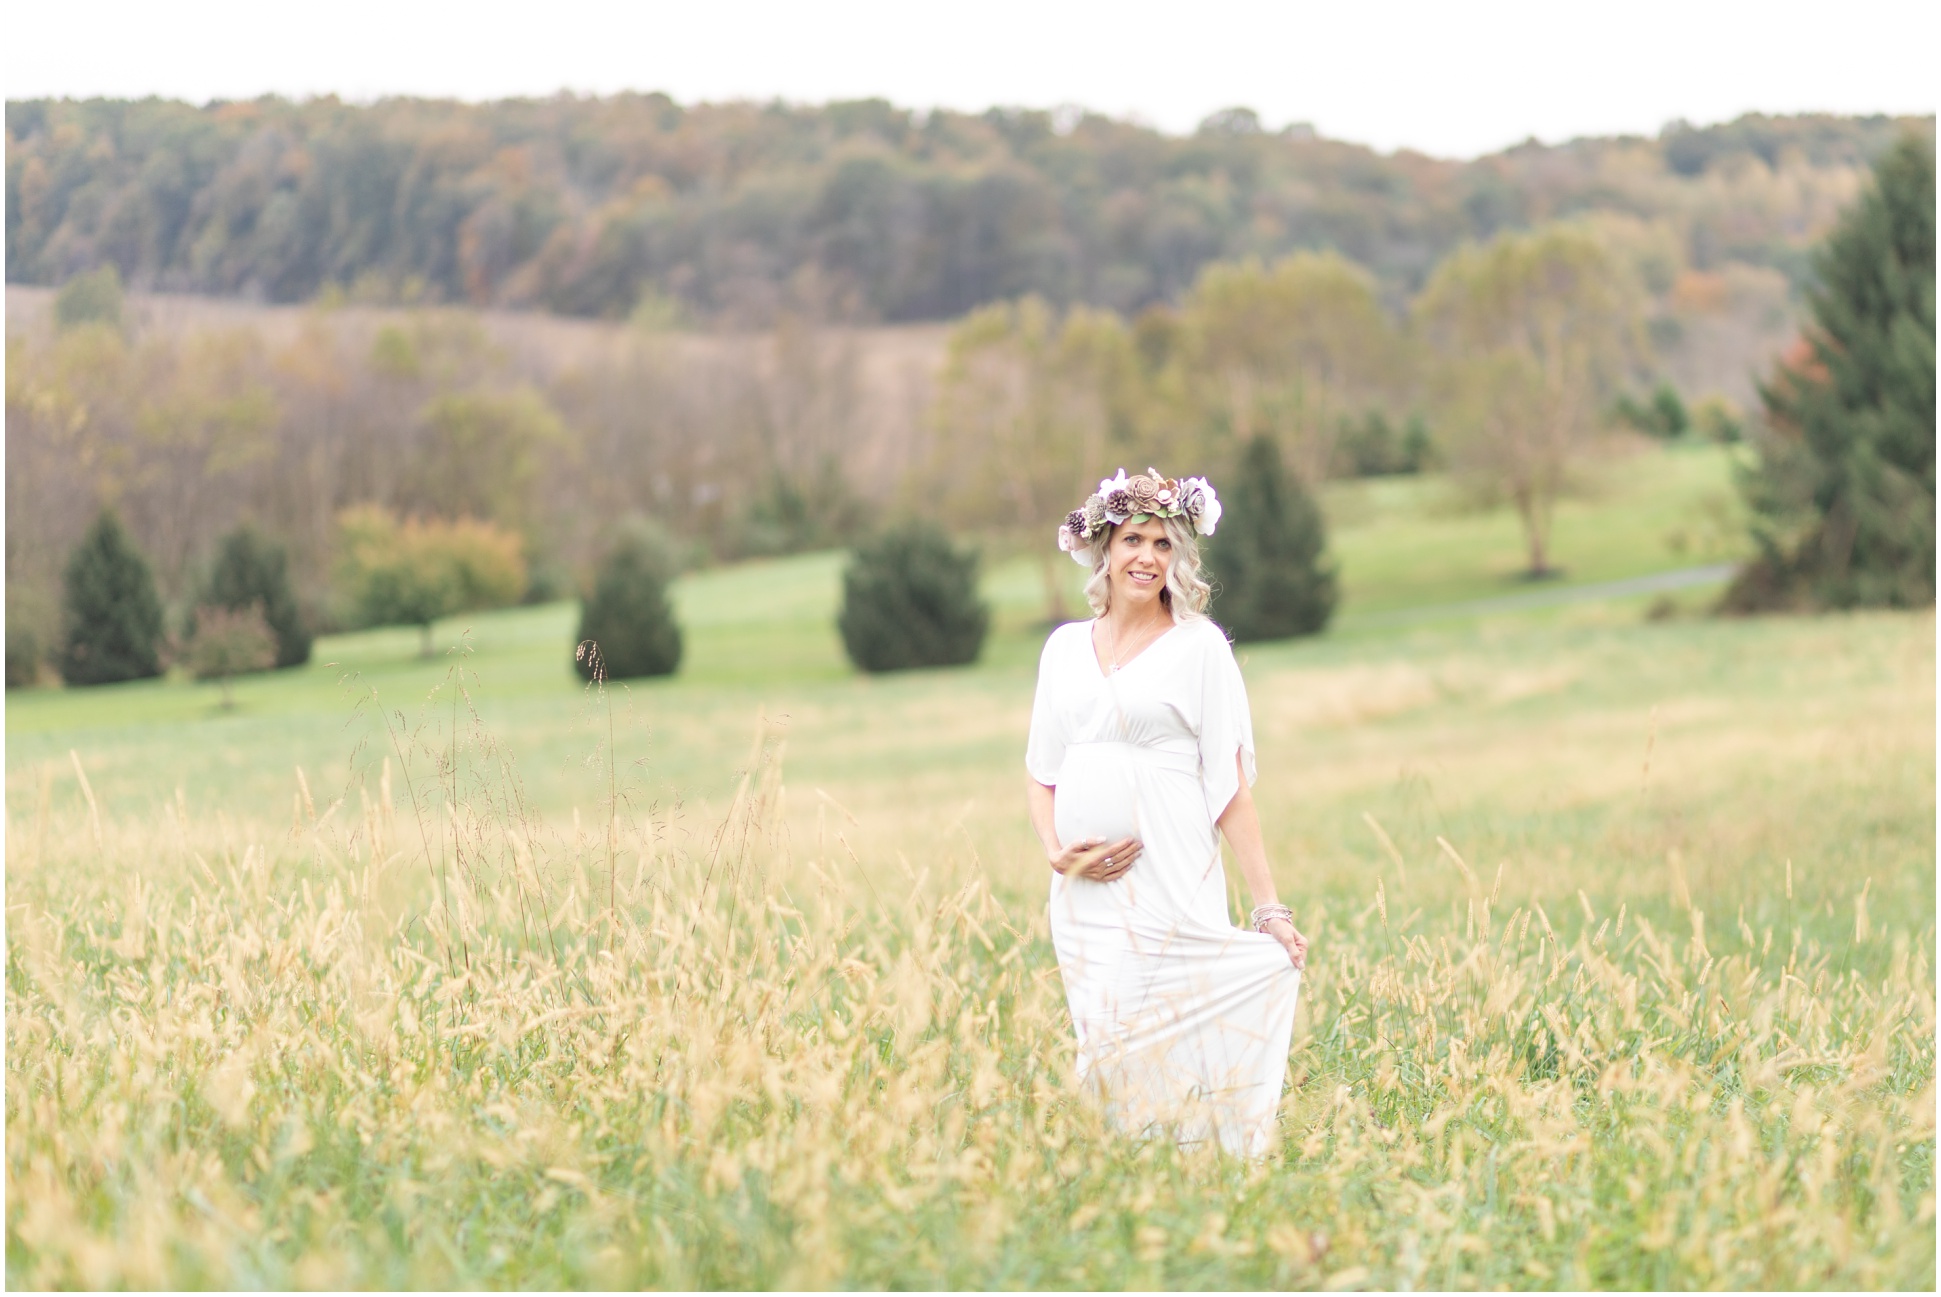 Rebecca standing in the middle of an open field for her maternity session in a white dress and a fall flower crown